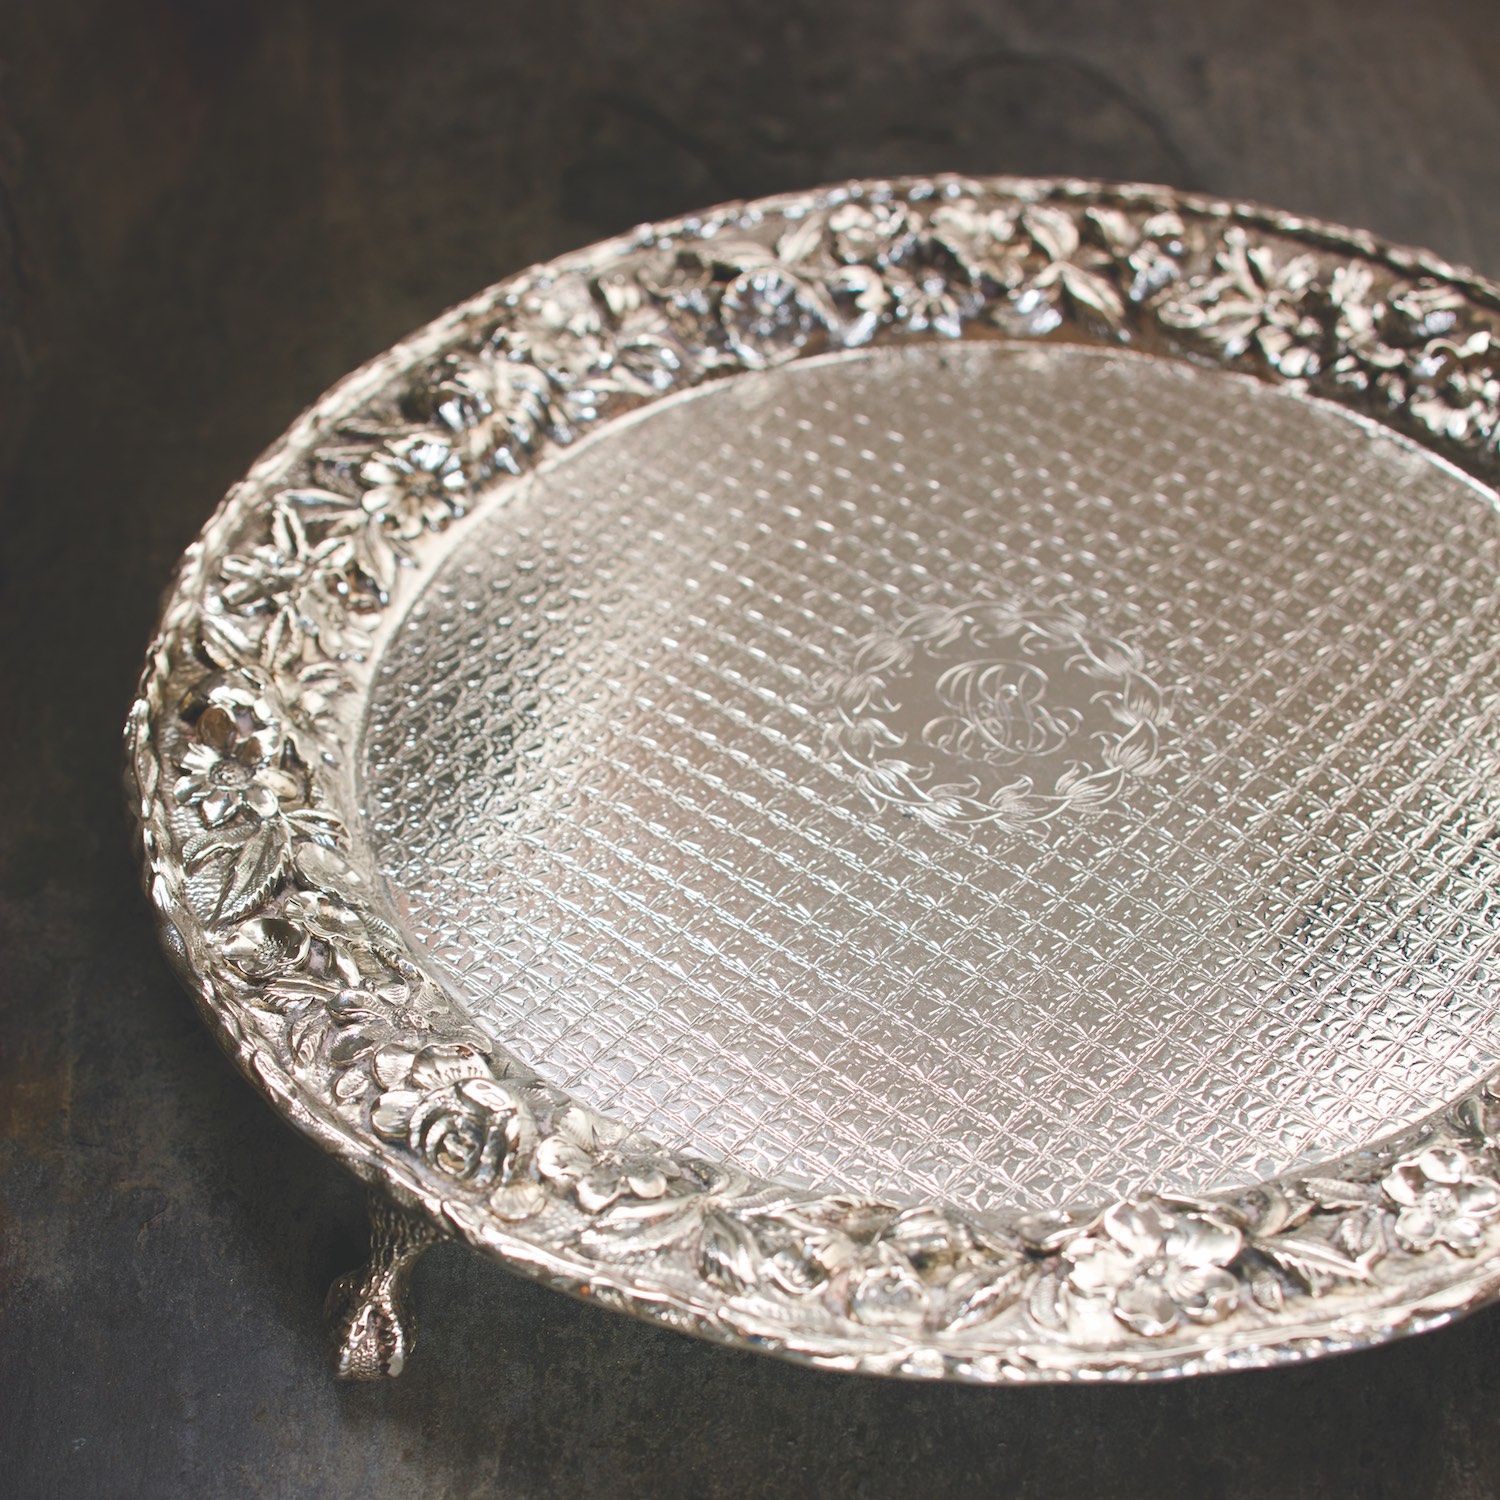 An antique monogrammed footed repoussé silver serving tray (Kirk Stieff).